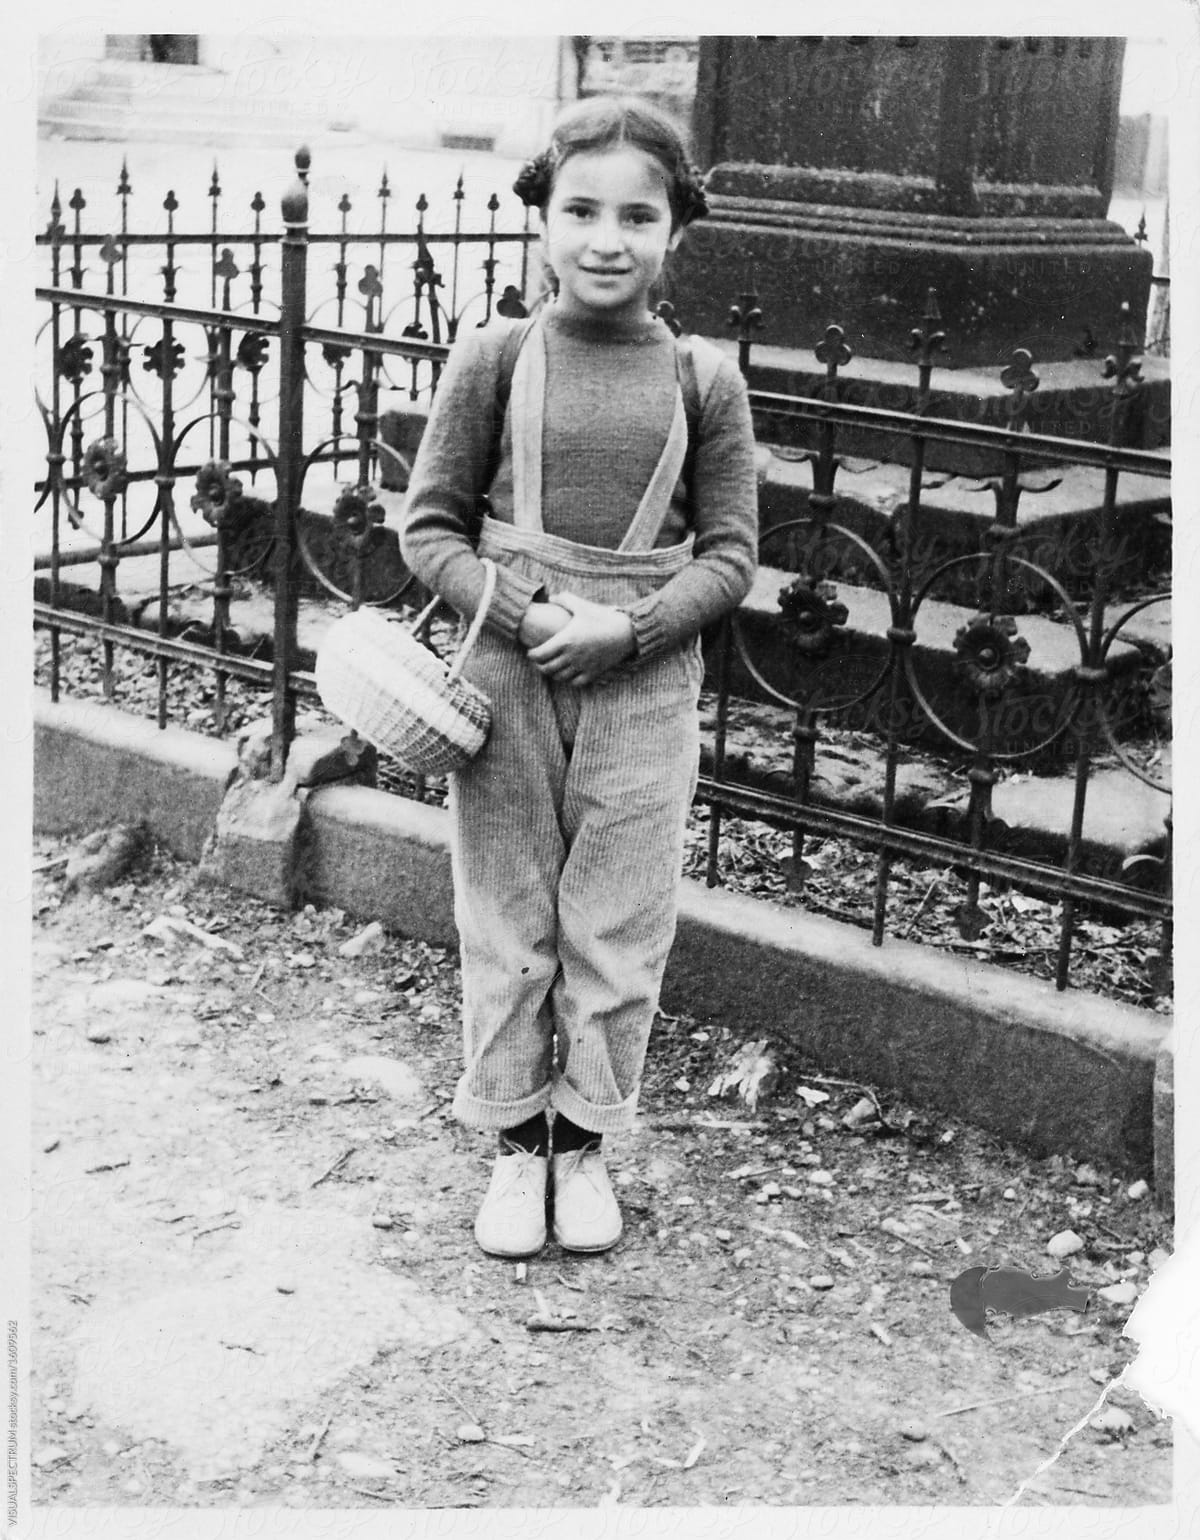 Scan of Old 1950s Black and White Photograph of Young Schoolgirl